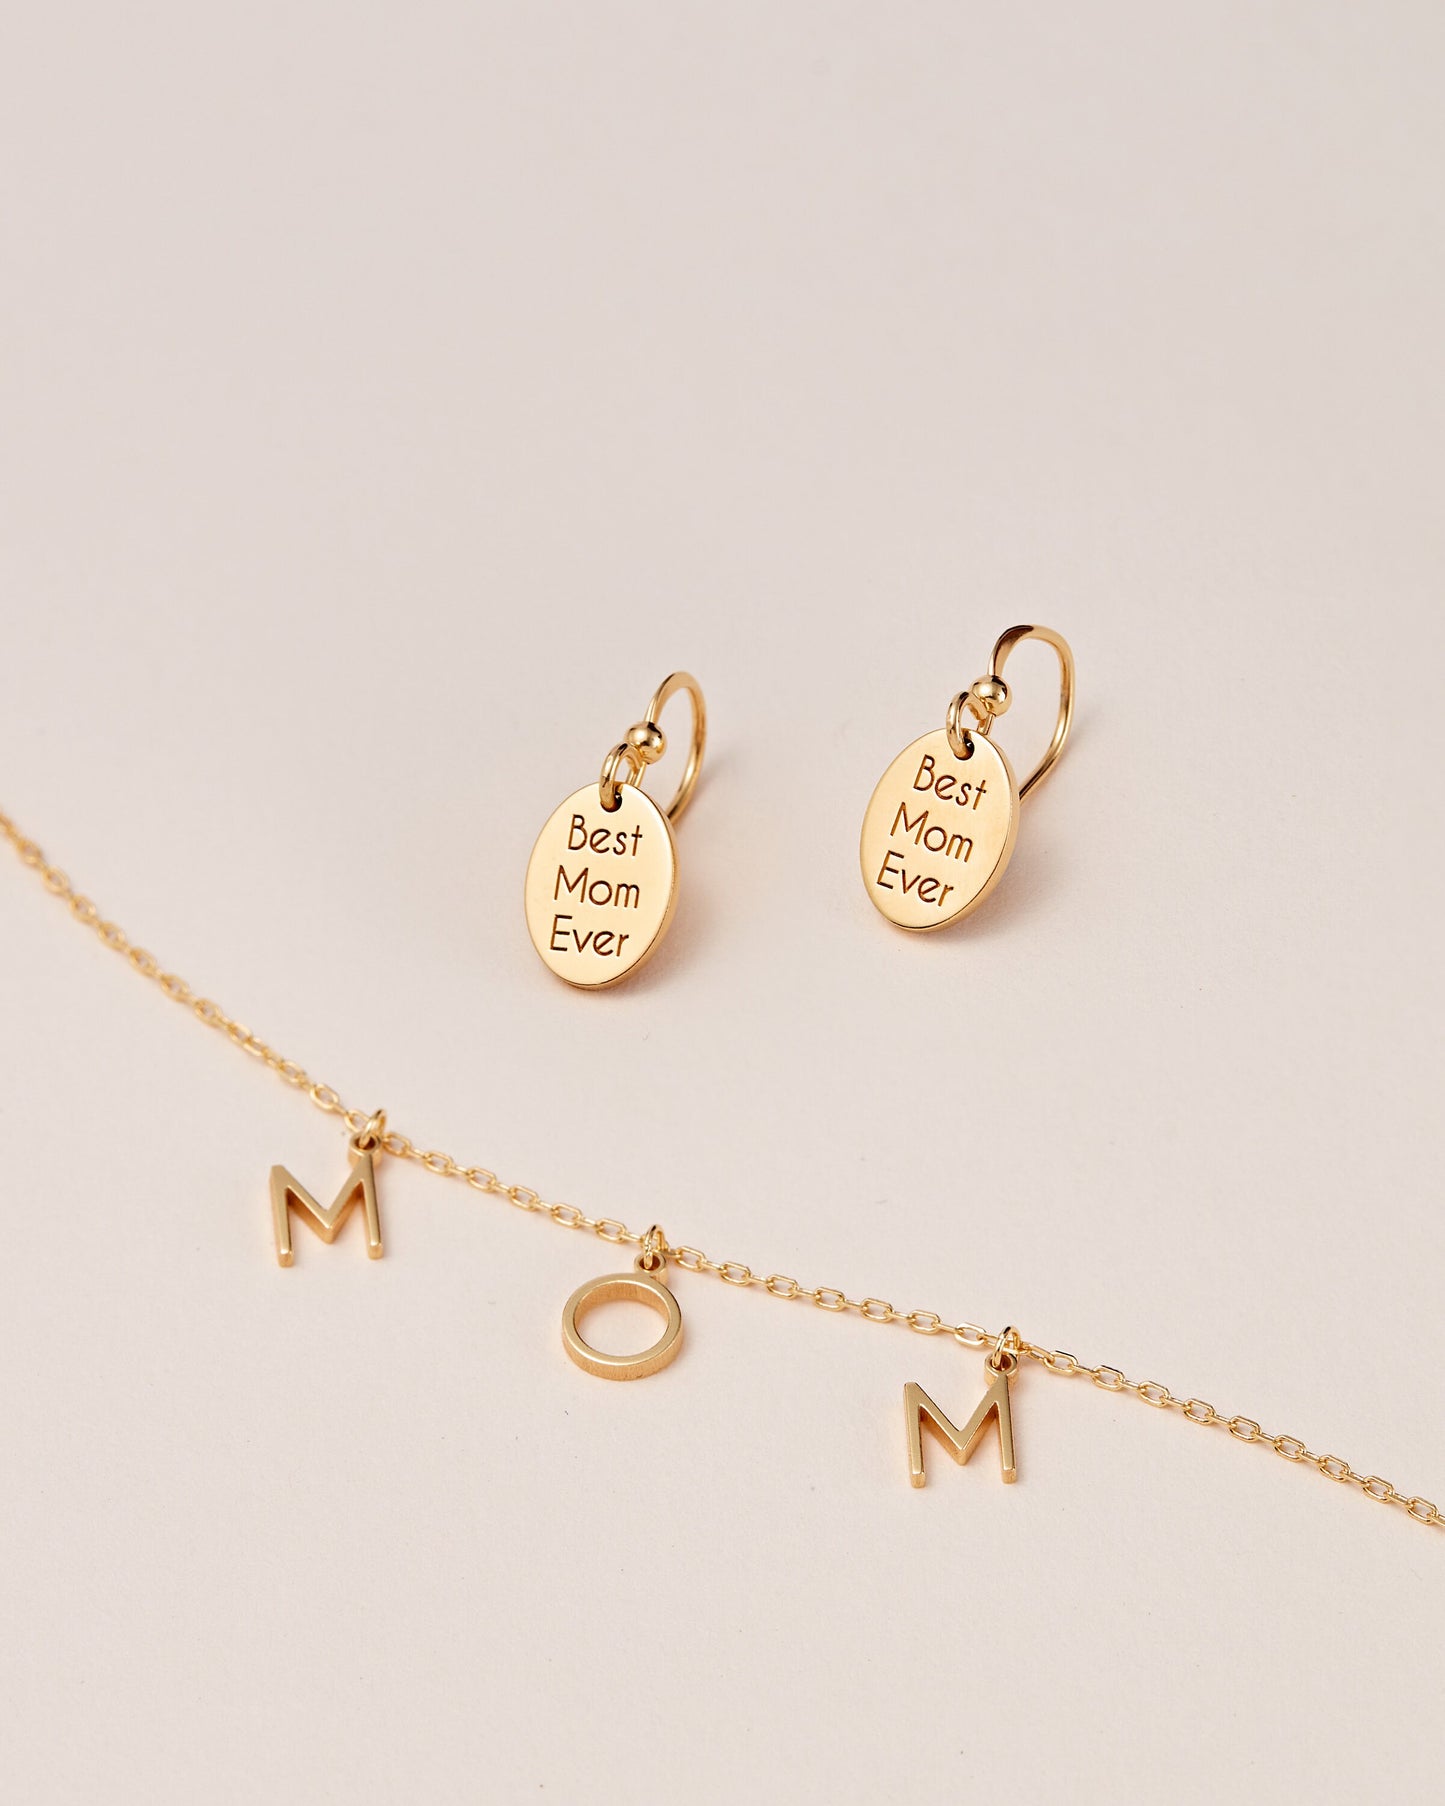 Ready To Ship | Mom Letter Necklace | Mother's Day Gift| Minimal Necklace | New Mom Gift| Pregnancy Necklace|Gift For Mom | Baby Shower Gift